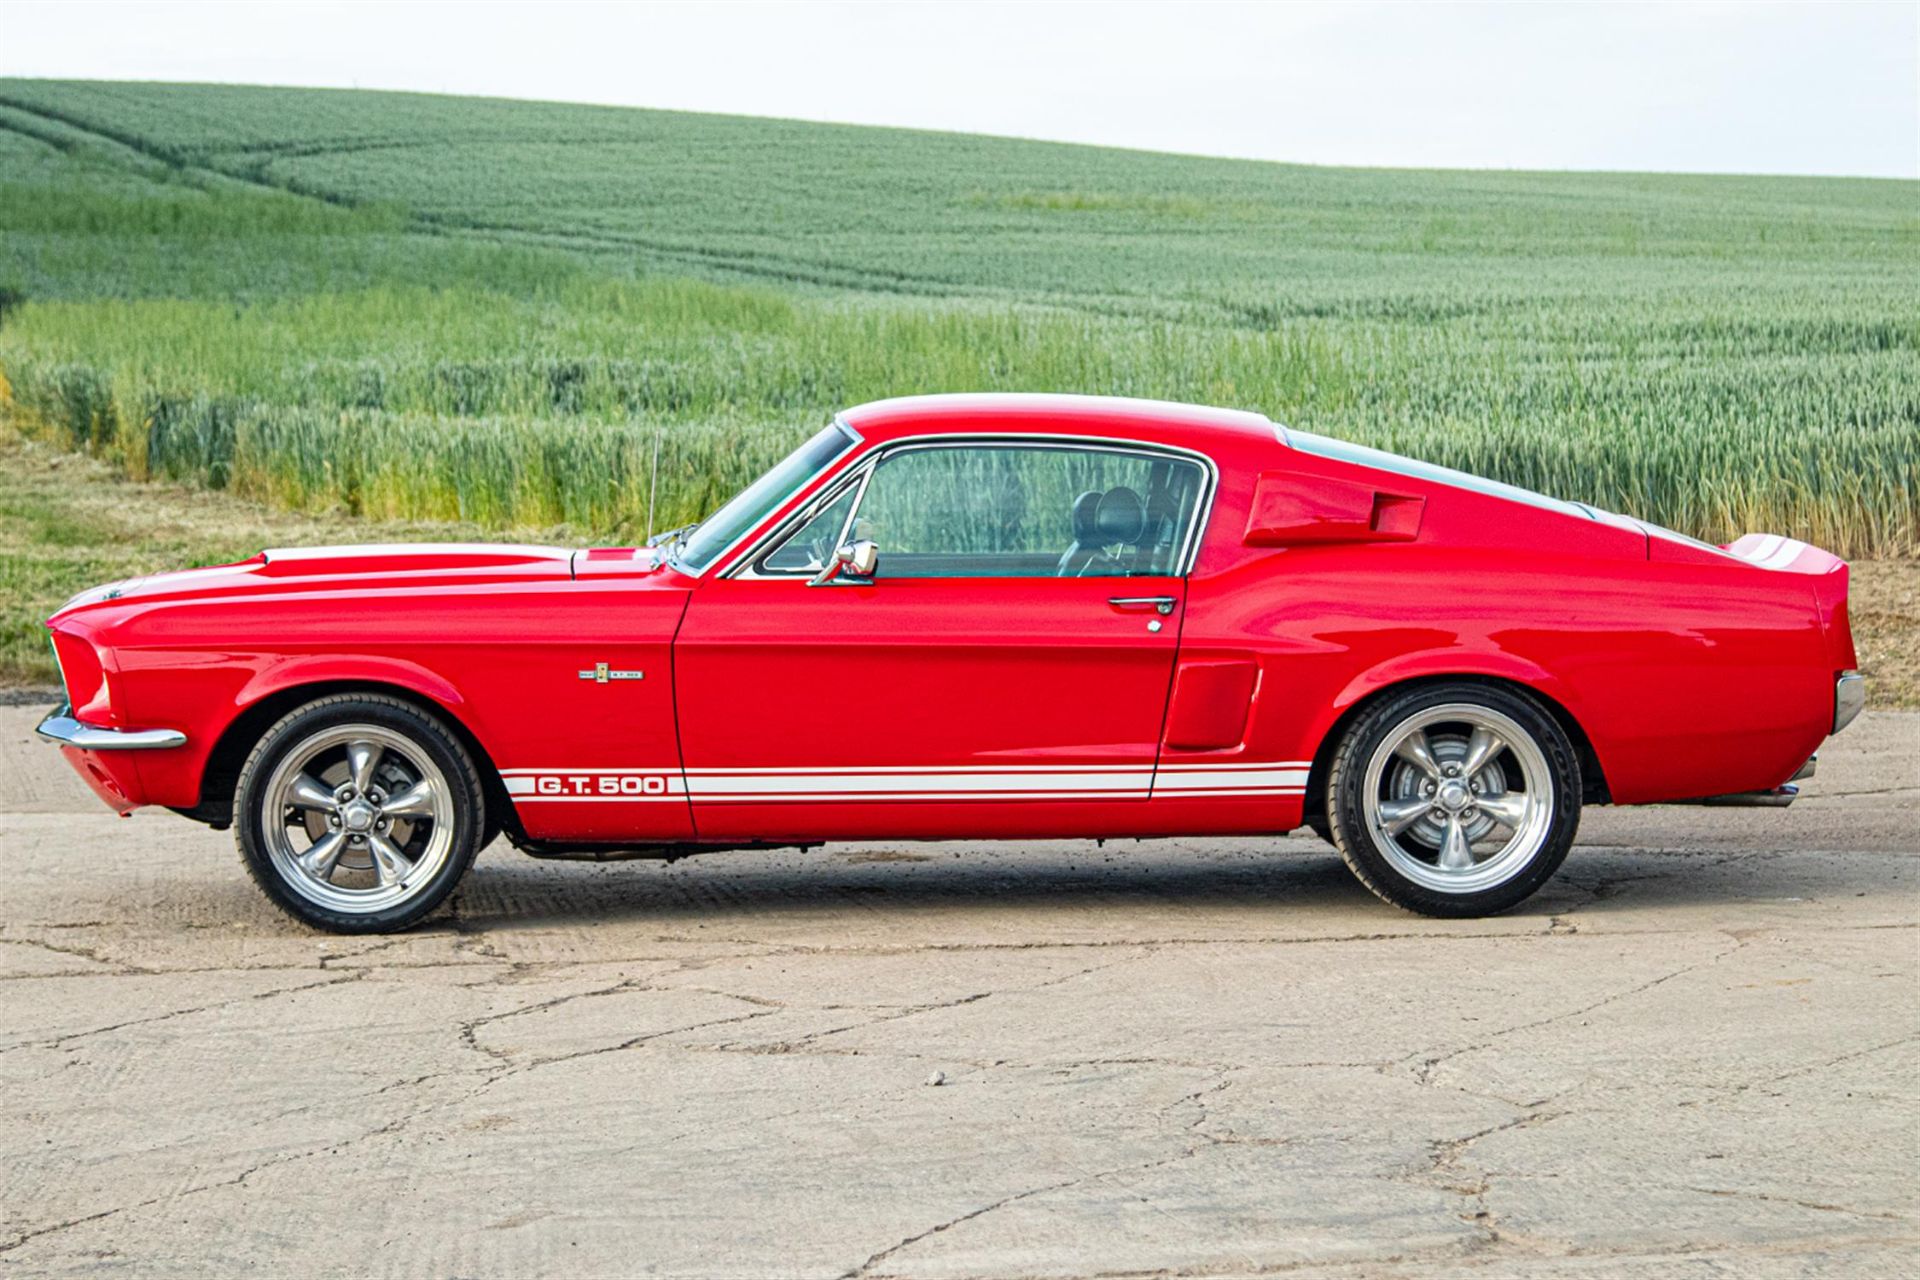 1967 Ford Mustang GT500 Replica - Image 8 of 8